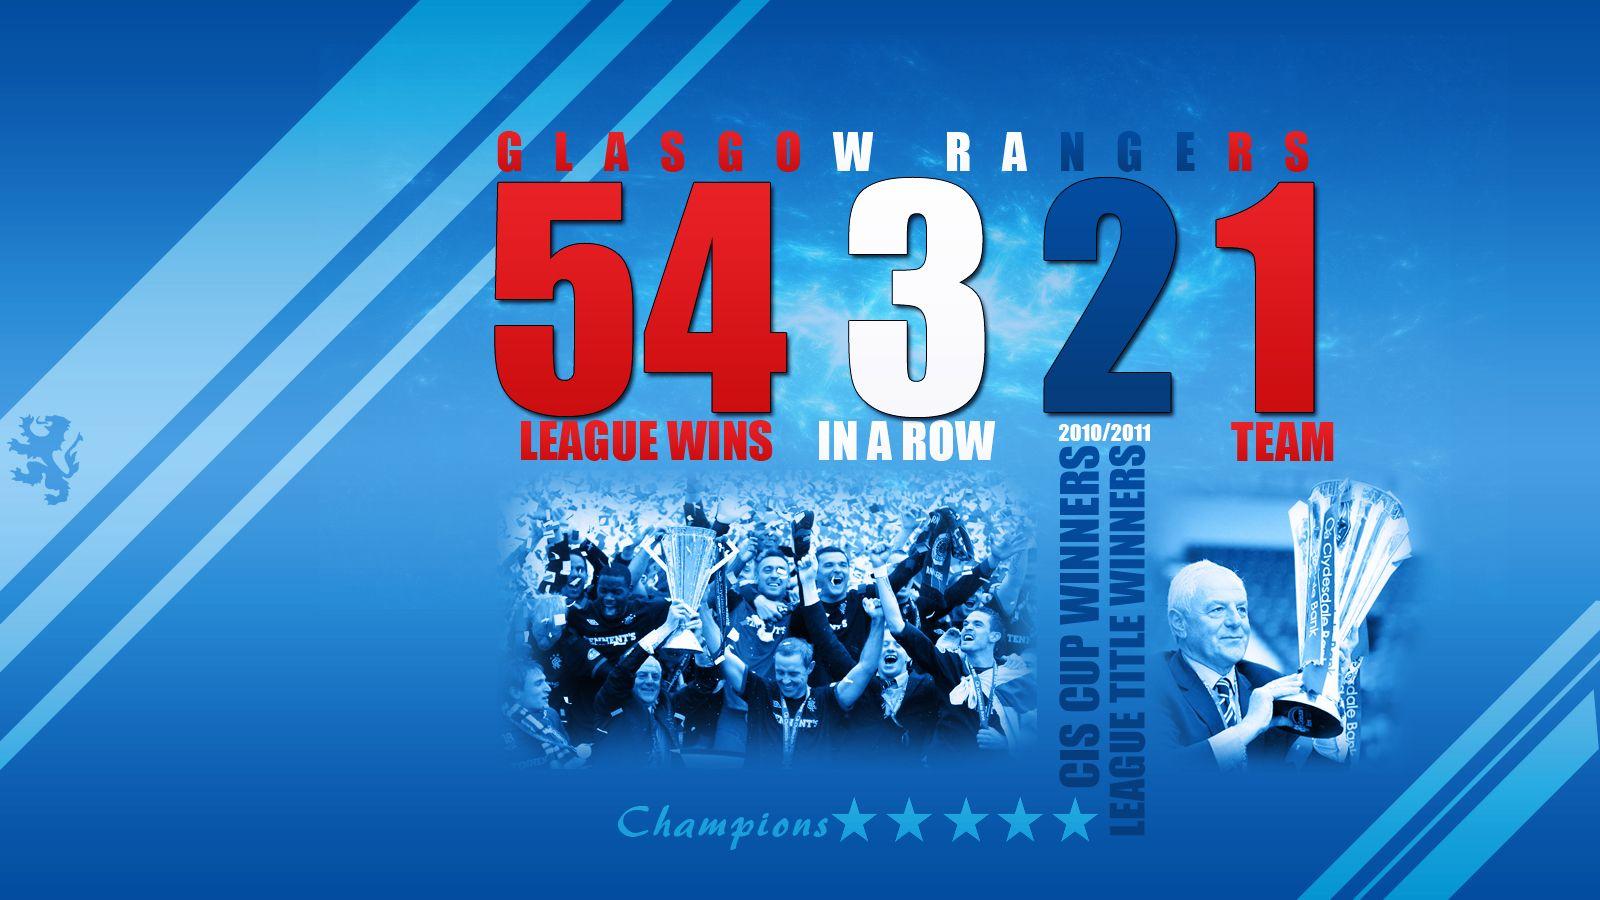 Glasgow Rangers Champions wallpaper, Football Picture and Photo